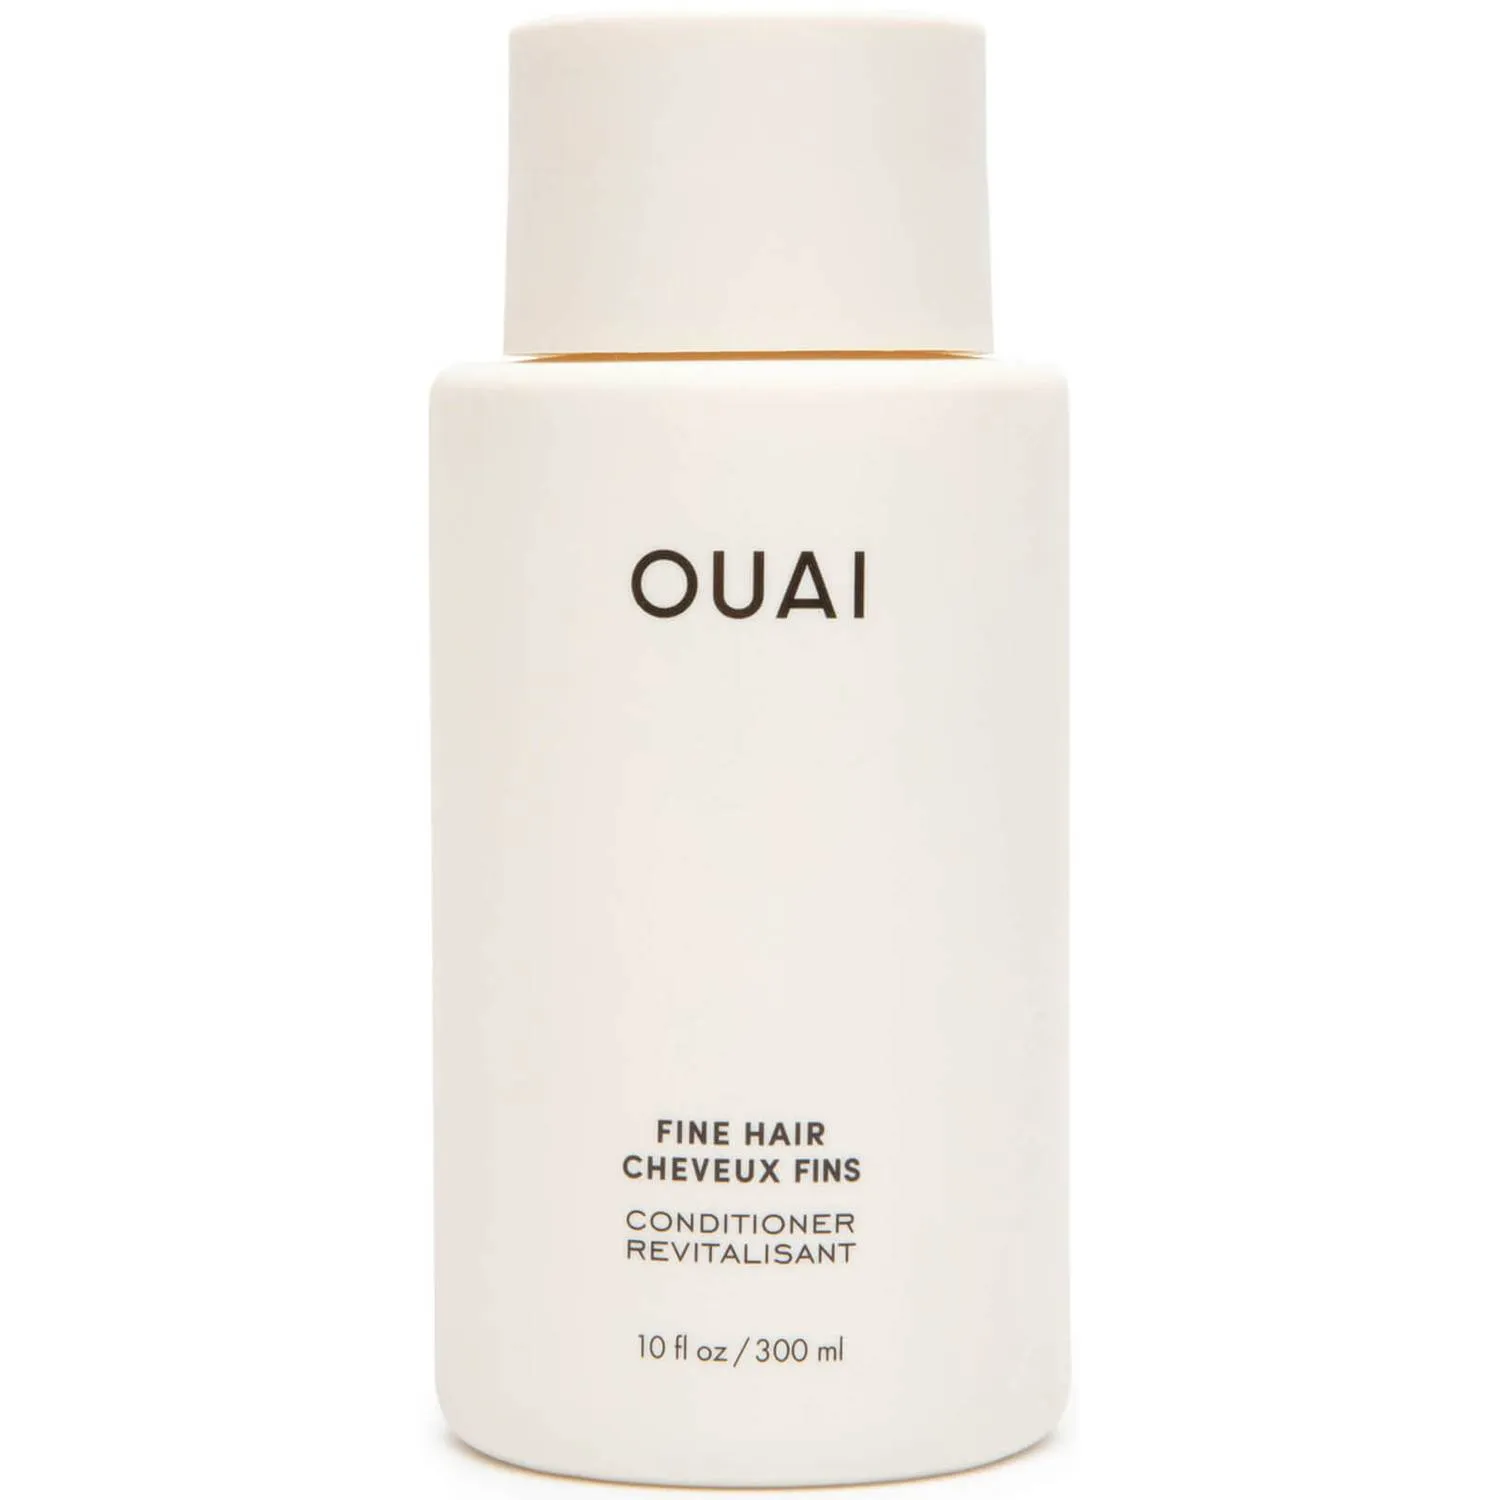 A tied FEMMENORDIC's choice in the Living Proof vs OUAI conditioner comparison, the OUAI Fine Hair Conditioner.